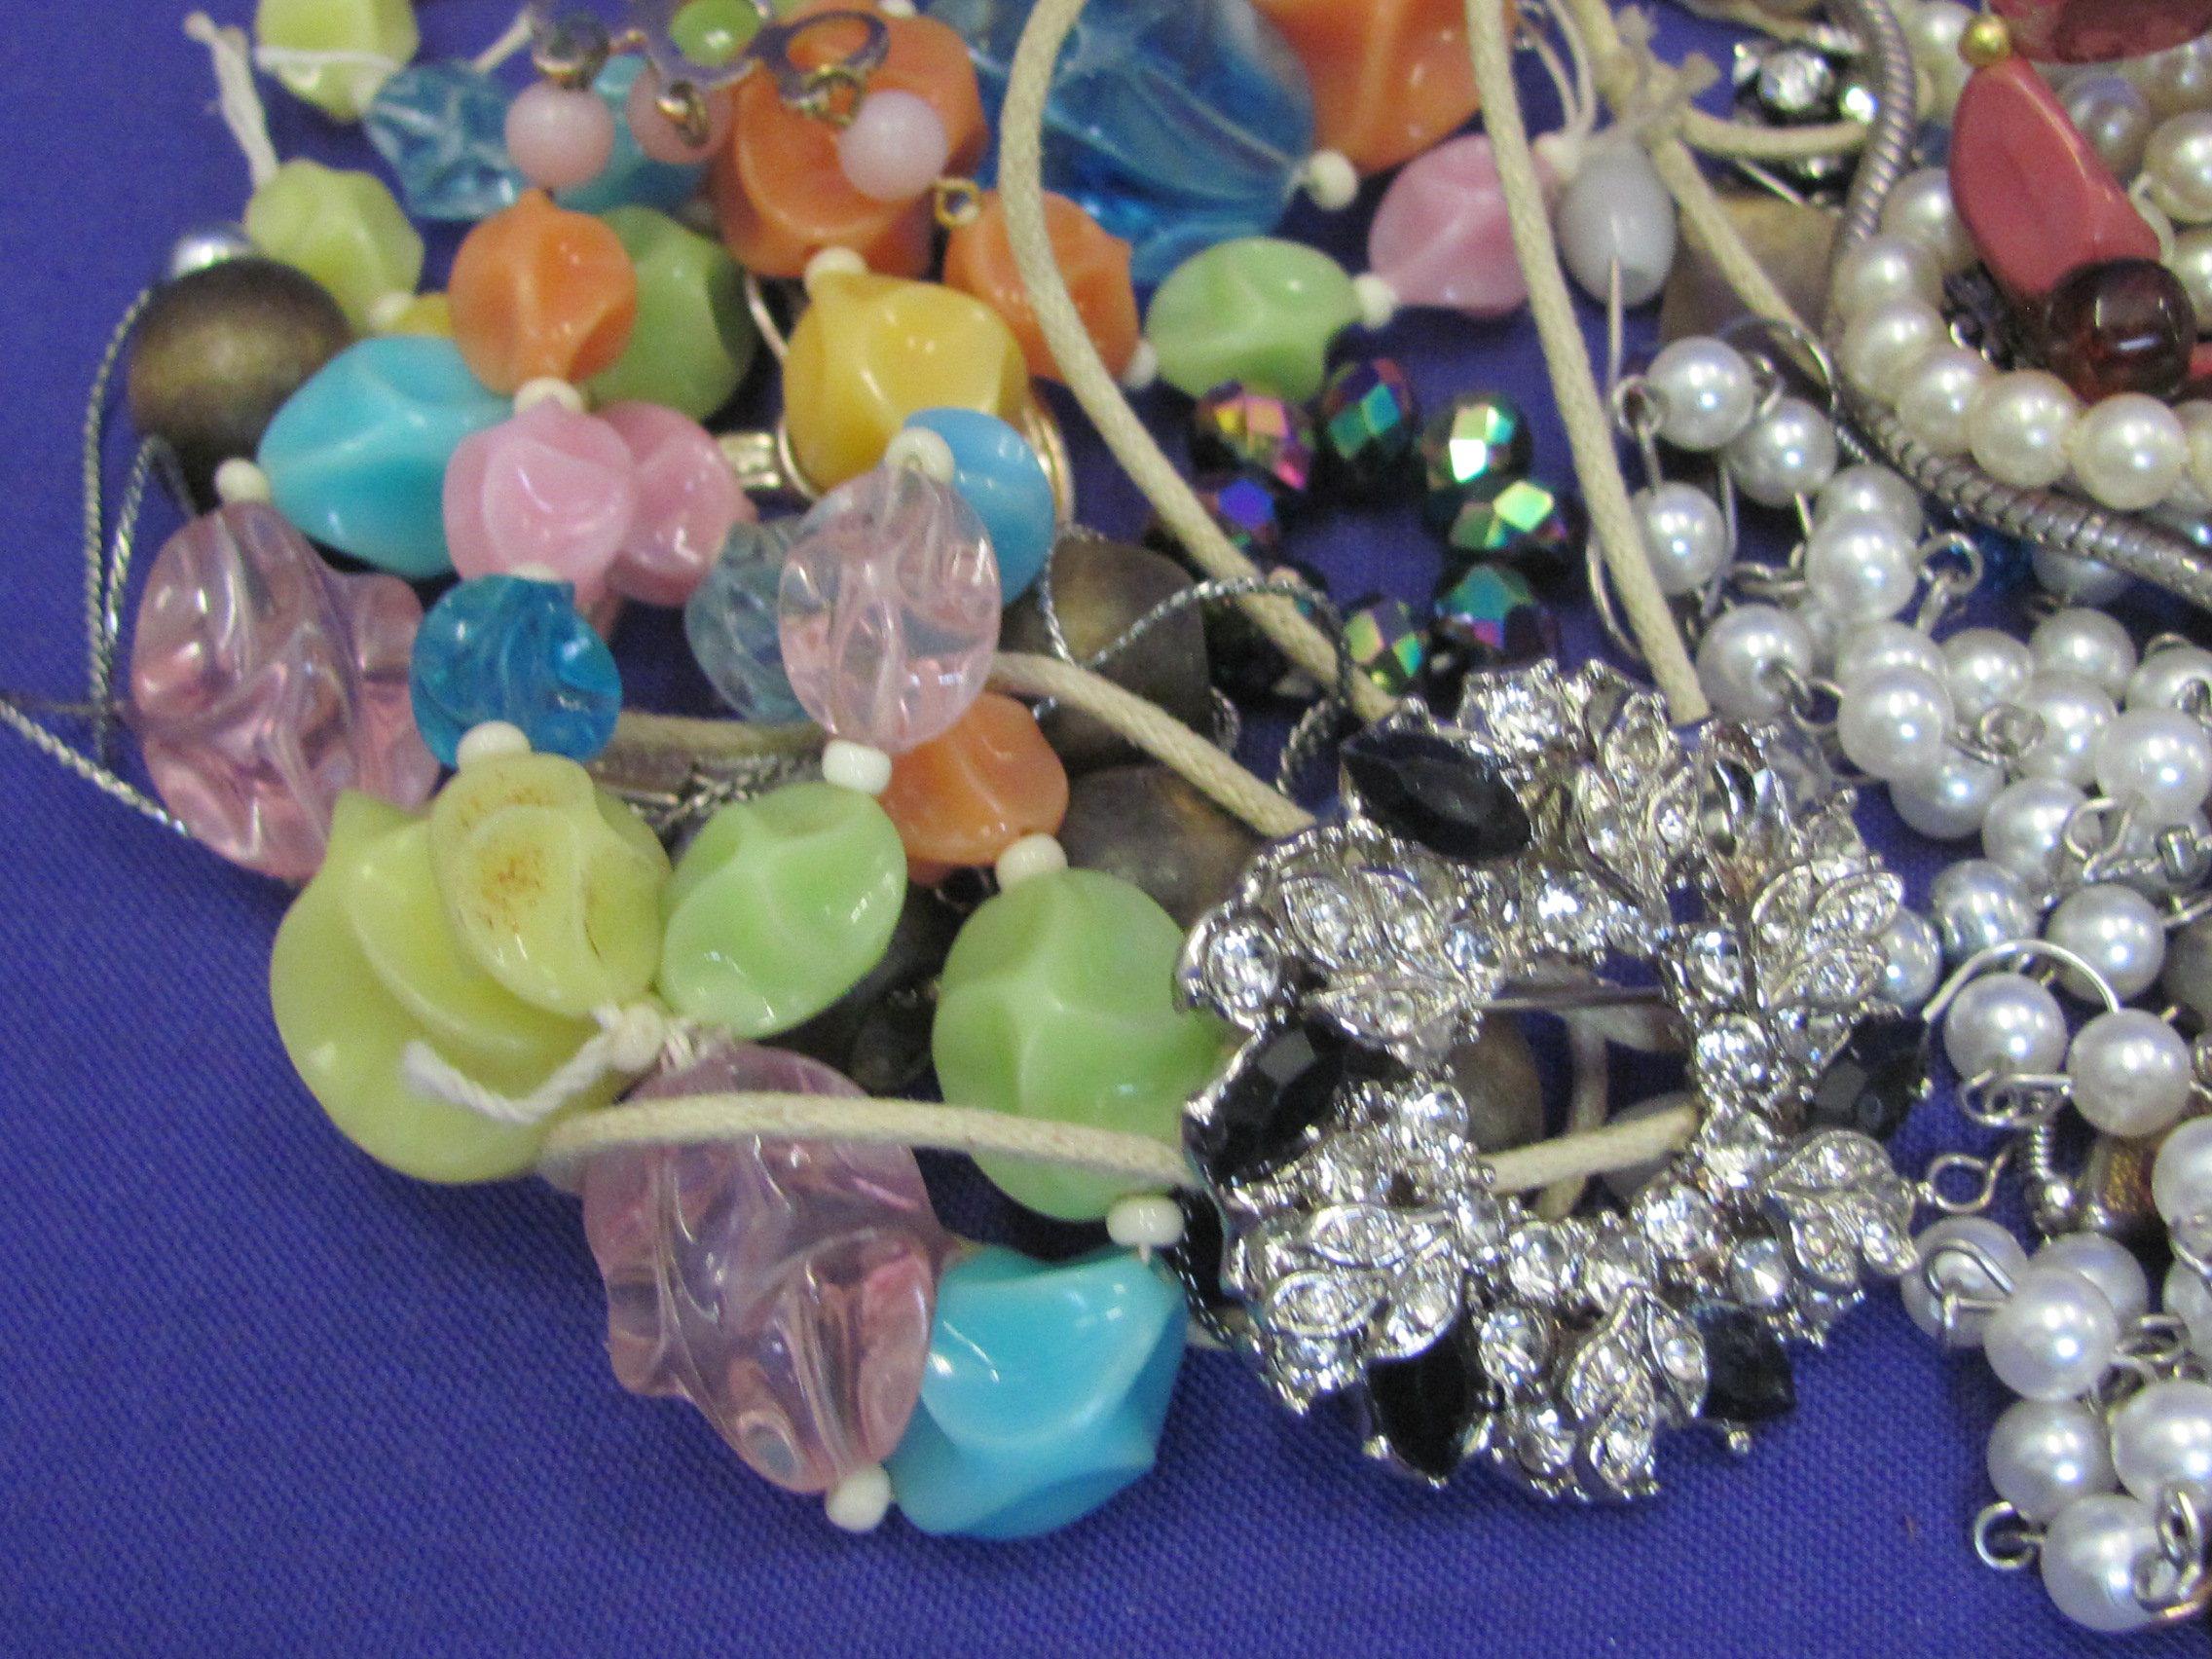 Bag of Jewelry for Crafts – Single Earrings – Missing Stones – Loose Beads